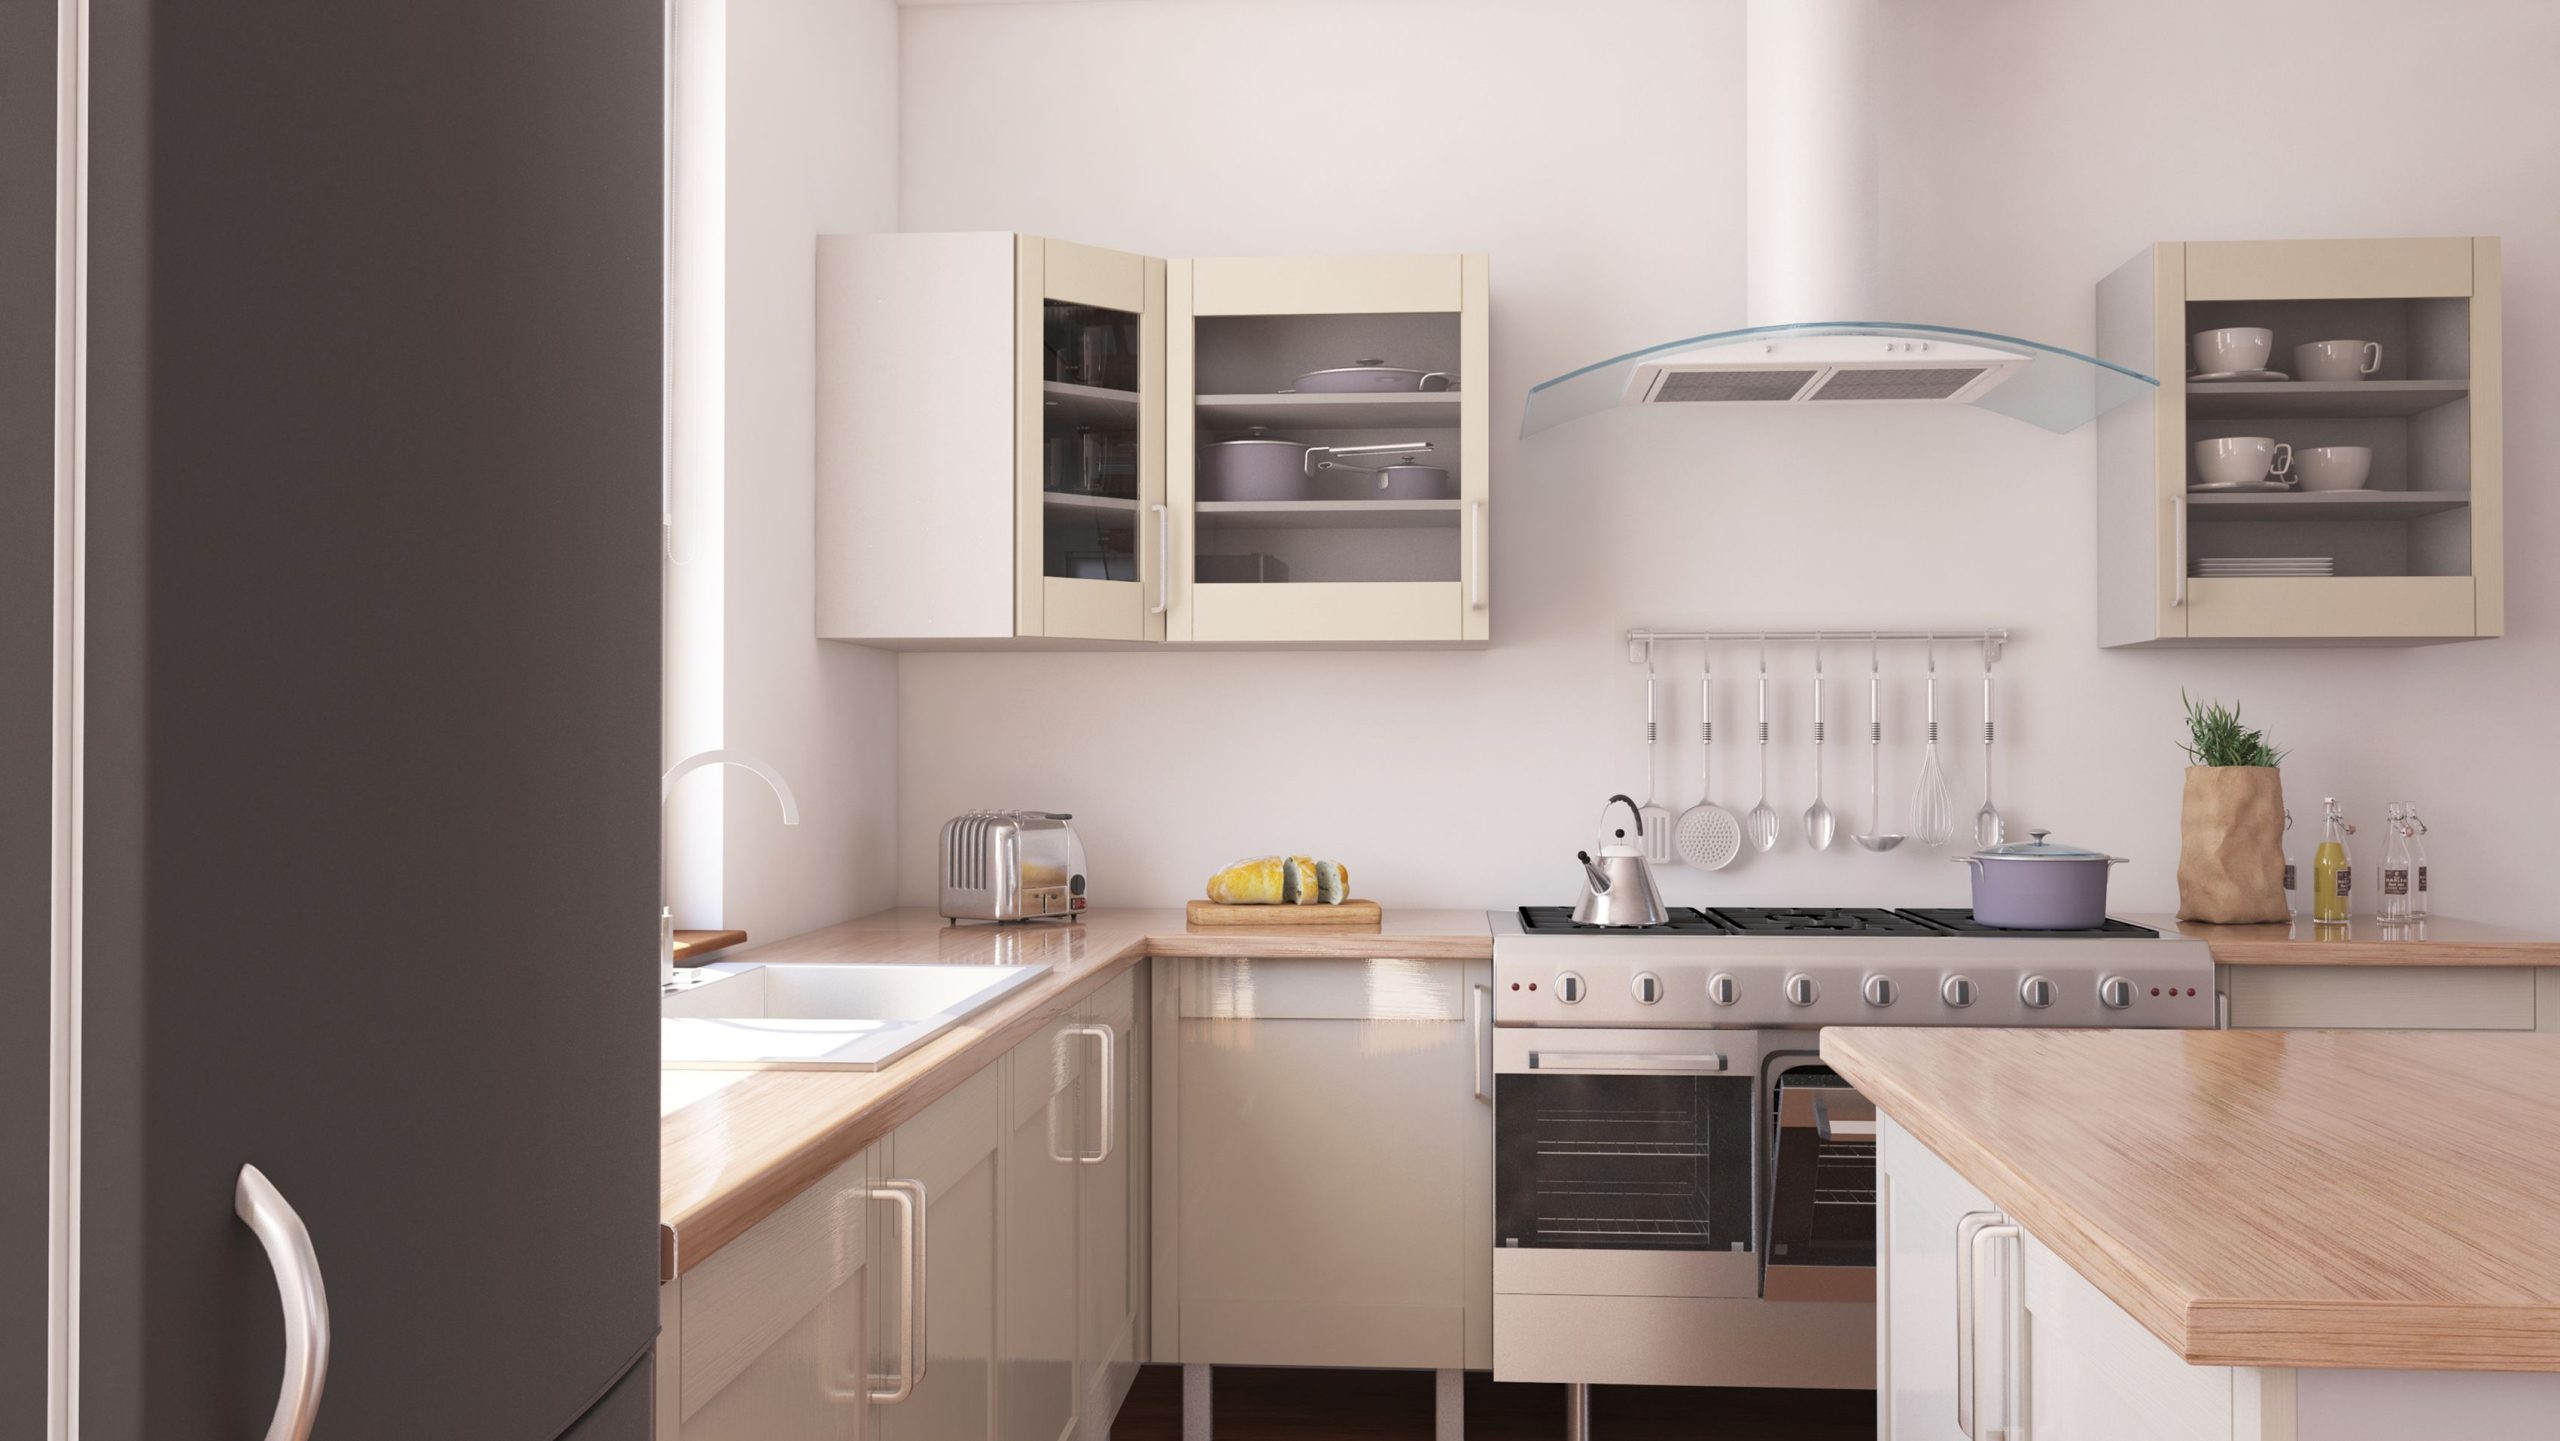 Ikea Kitchen Installation Services: Tips for a Hassle-free Experience